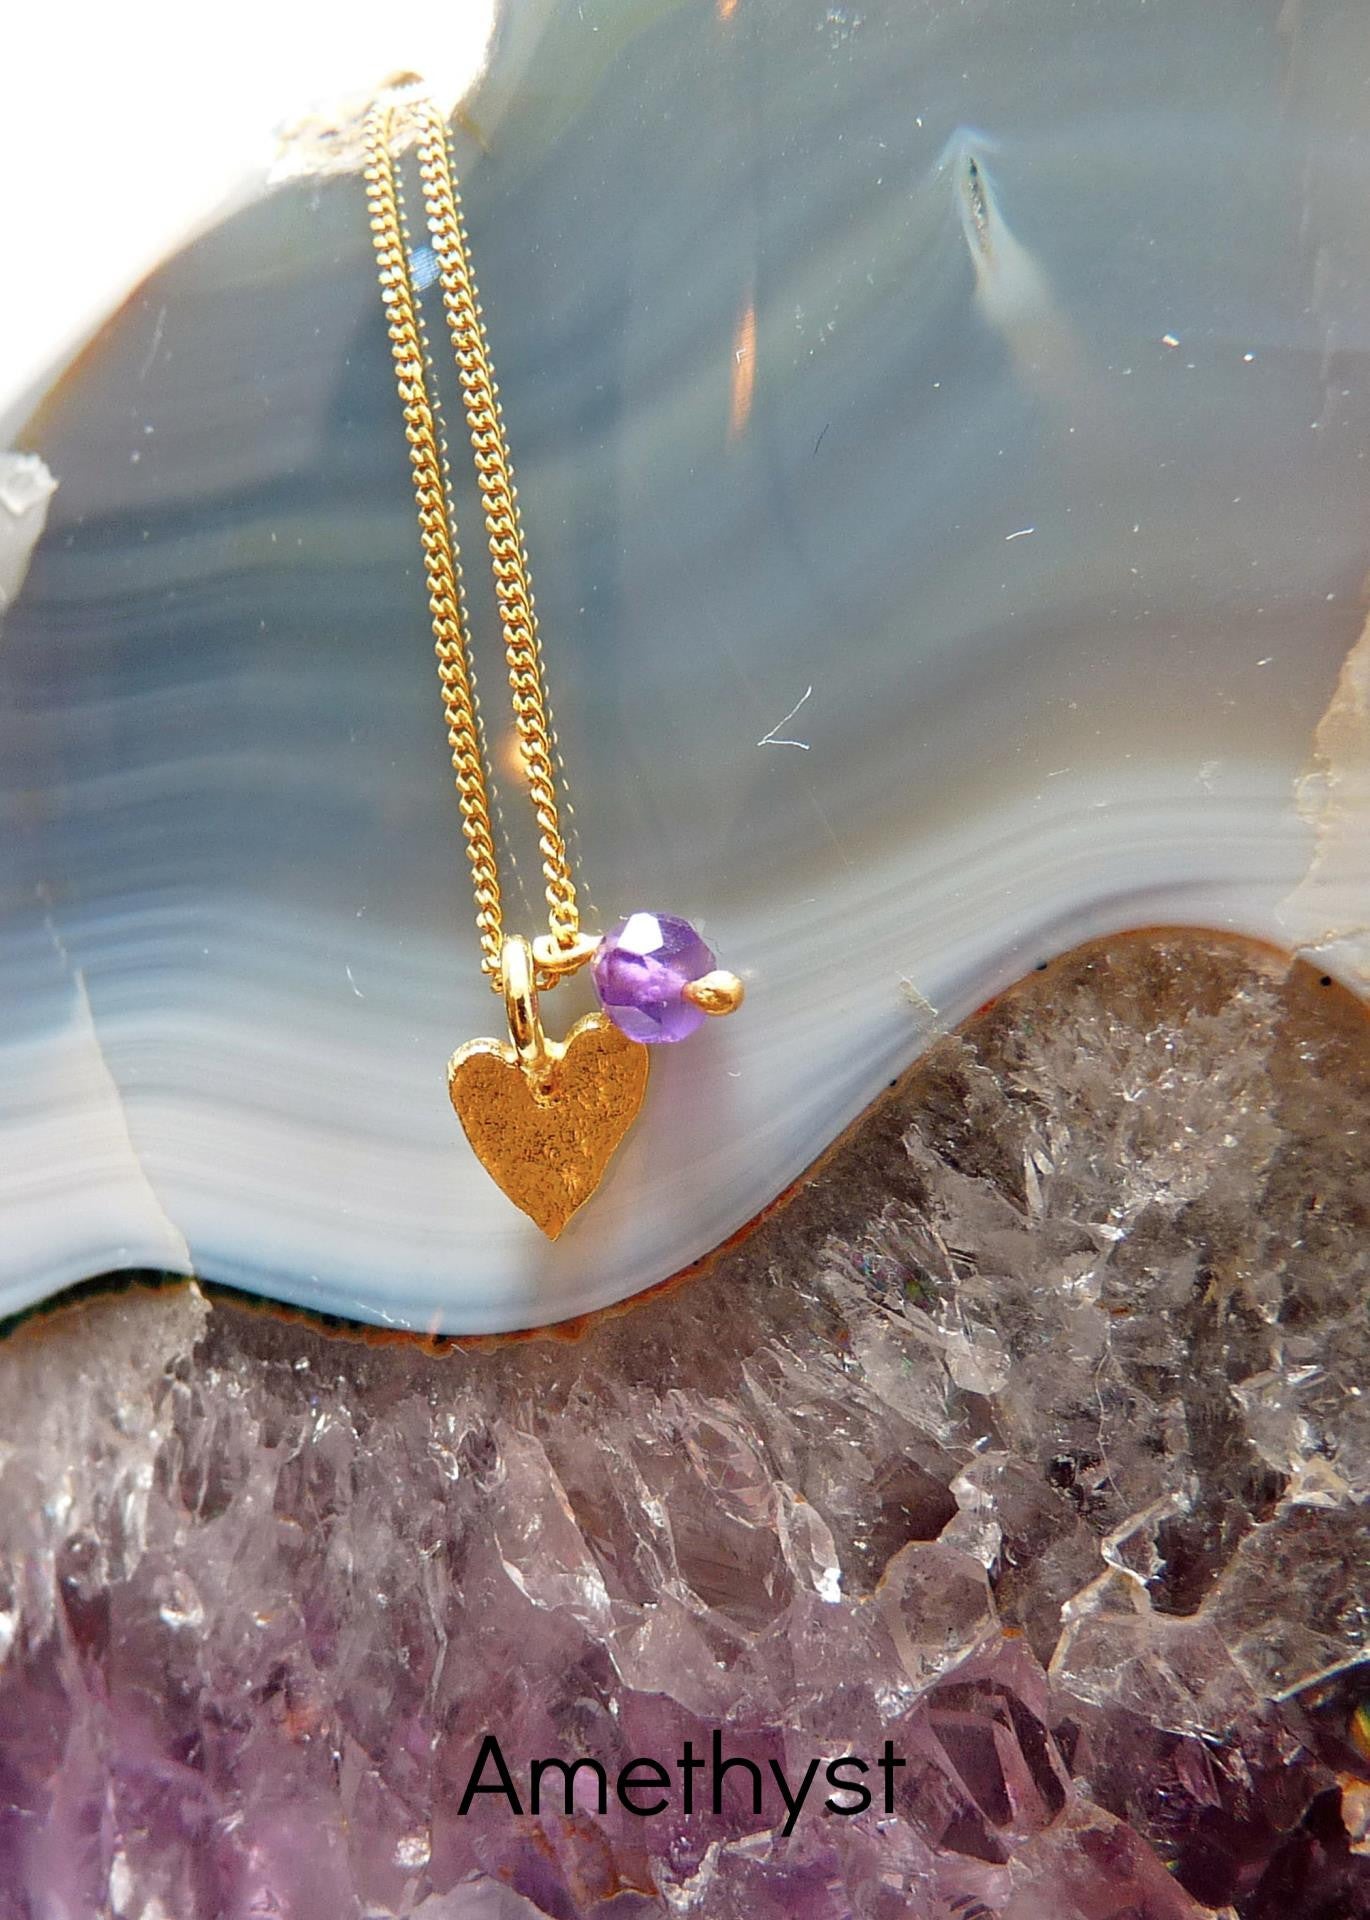 Delicate 18ct Gold Plate Heart Necklace